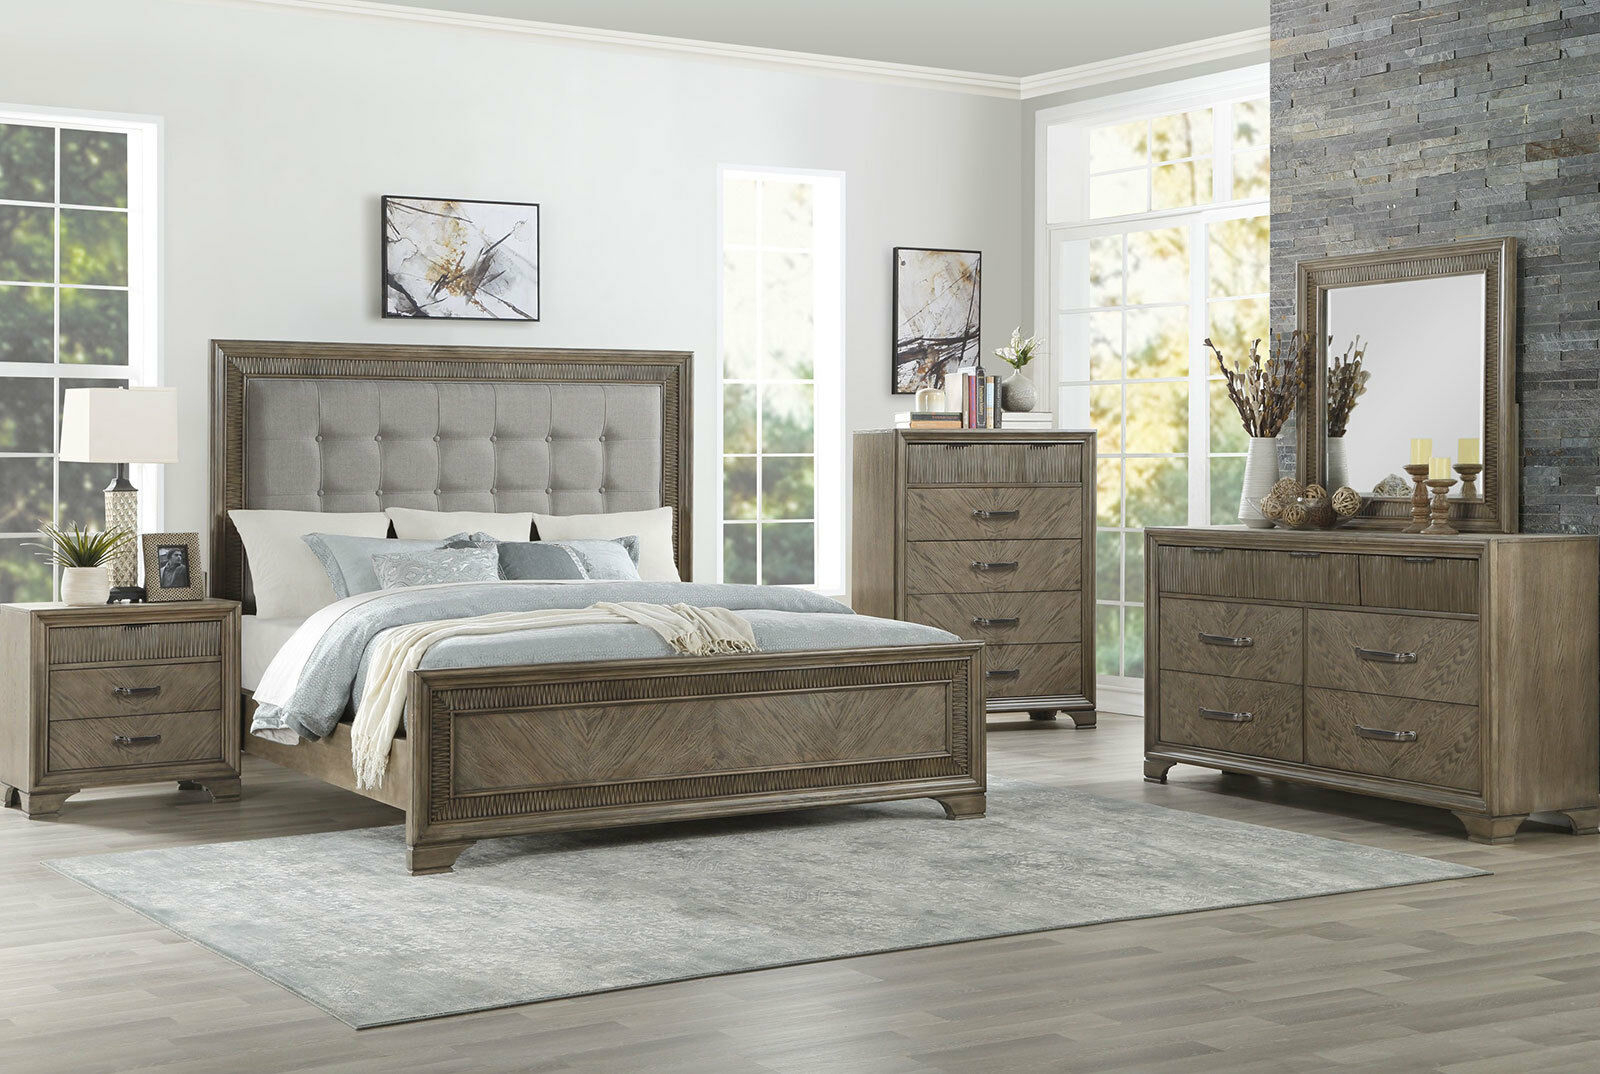 New Transitional Gray 5 Piece Bedroom Set W Queen Size Fabric Headboard Bed A4q throughout dimensions 1600 X 1074